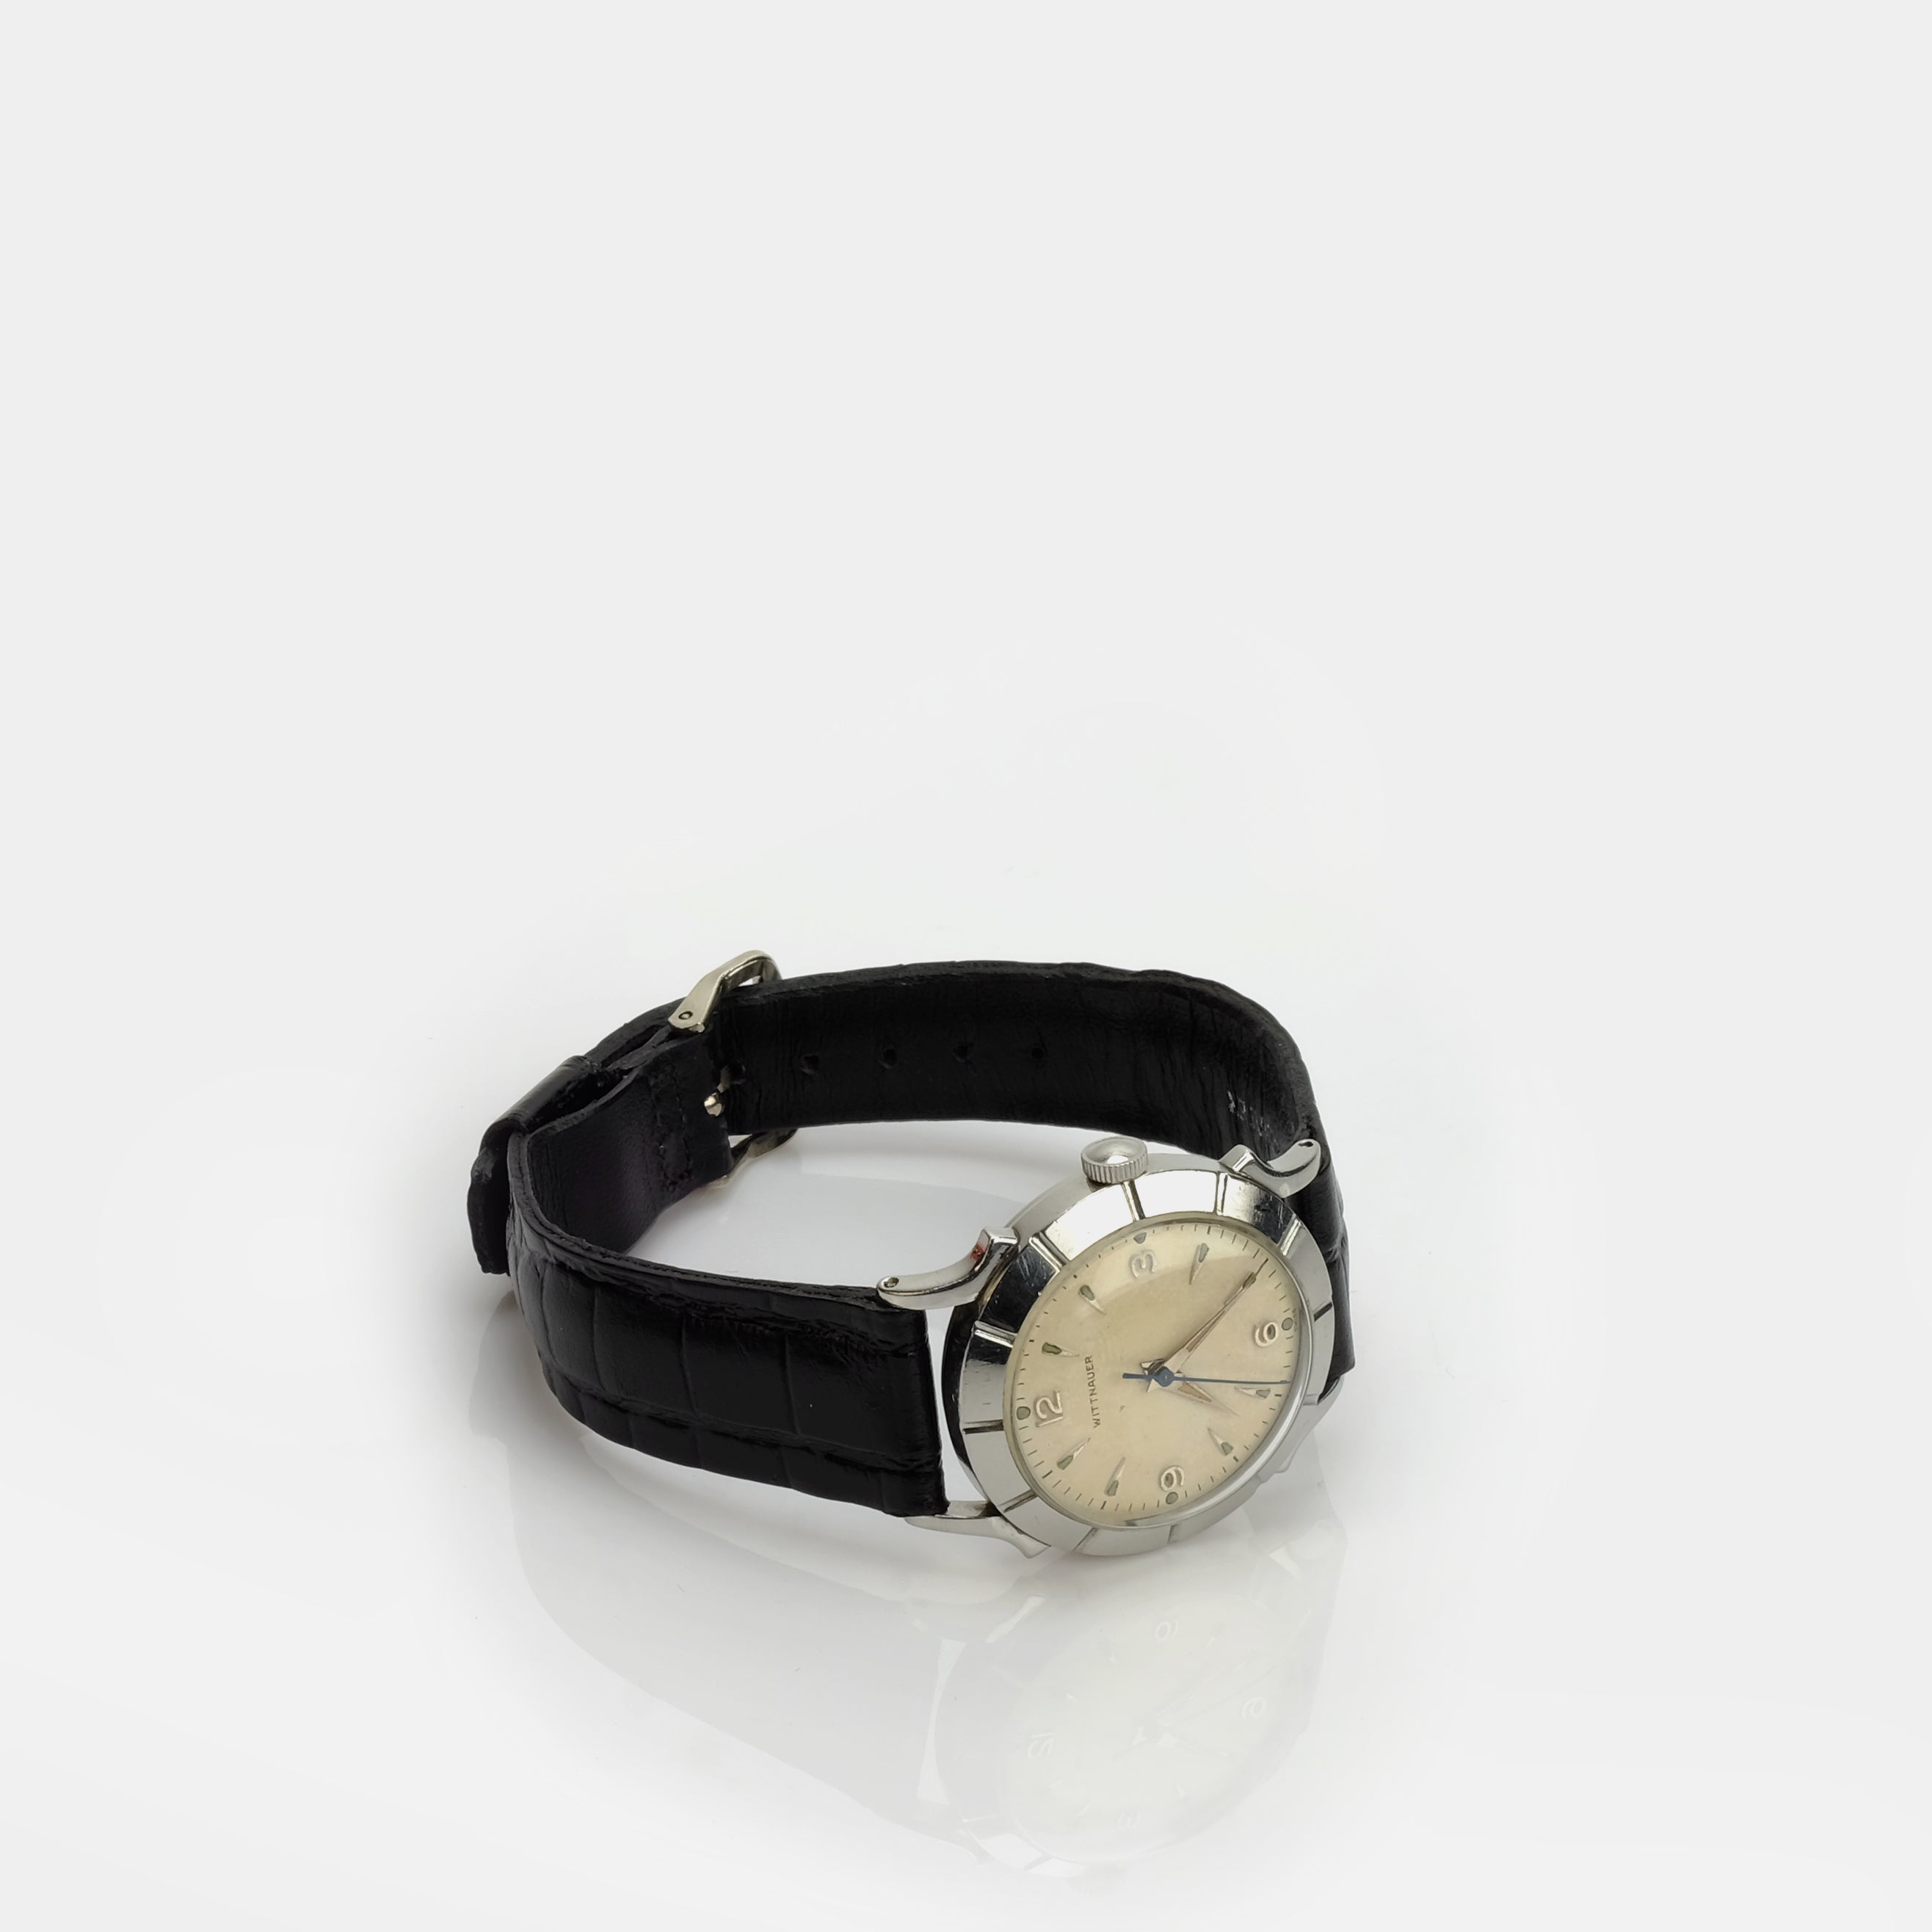 Wittnauer Time-Only Manual-Wind ref. 2065-SW Circa 1950s Wristwatch